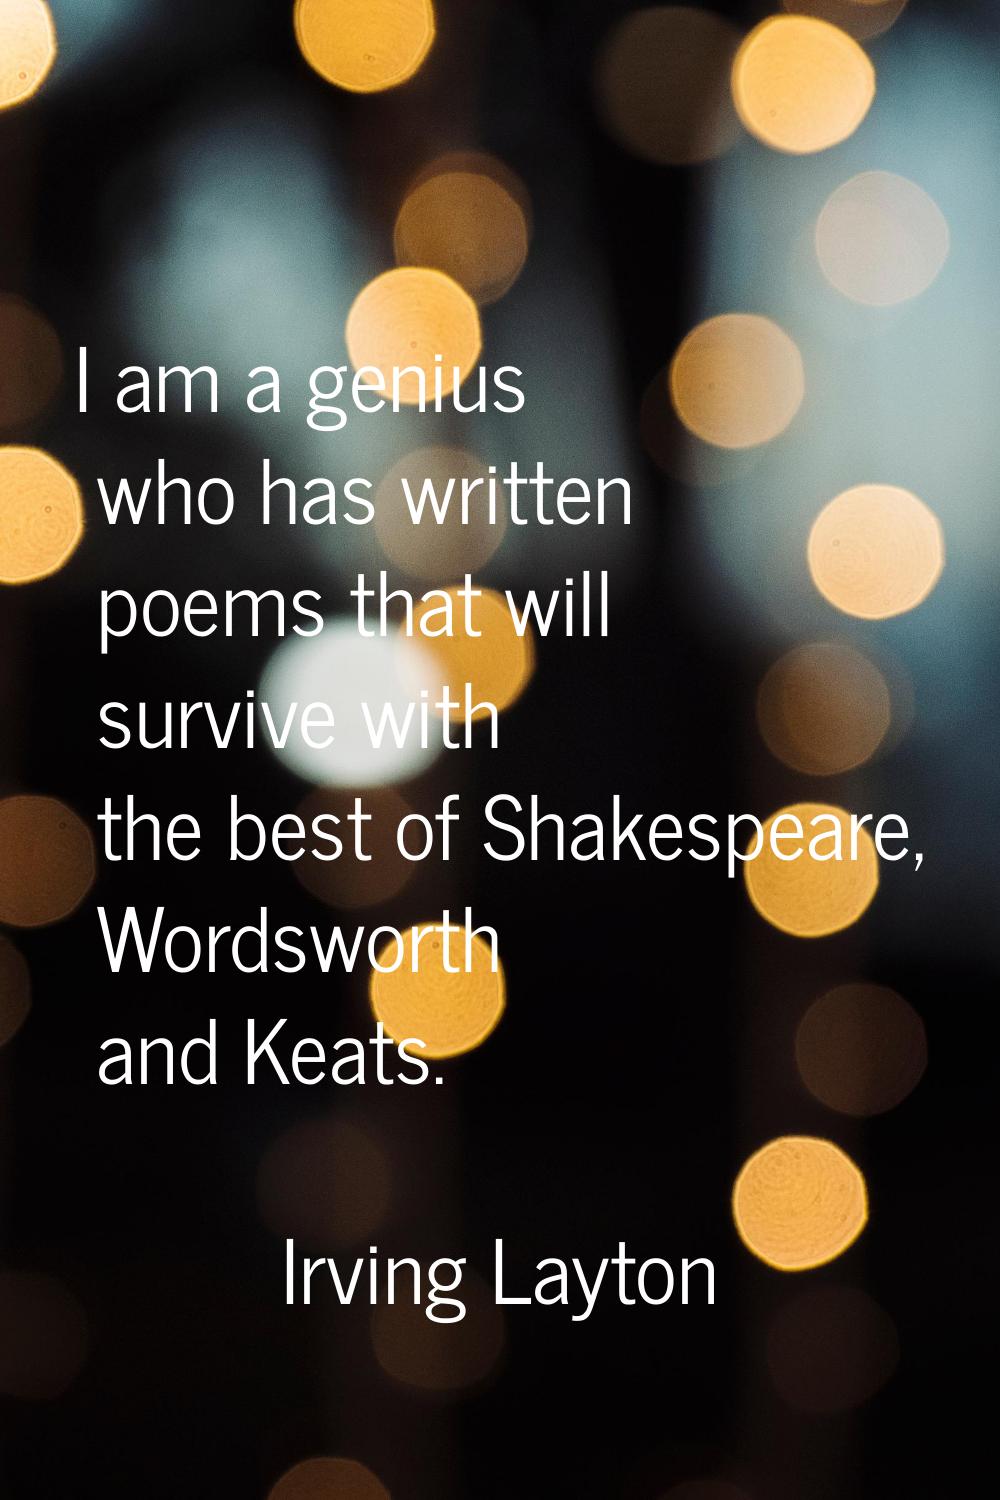 I am a genius who has written poems that will survive with the best of Shakespeare, Wordsworth and 